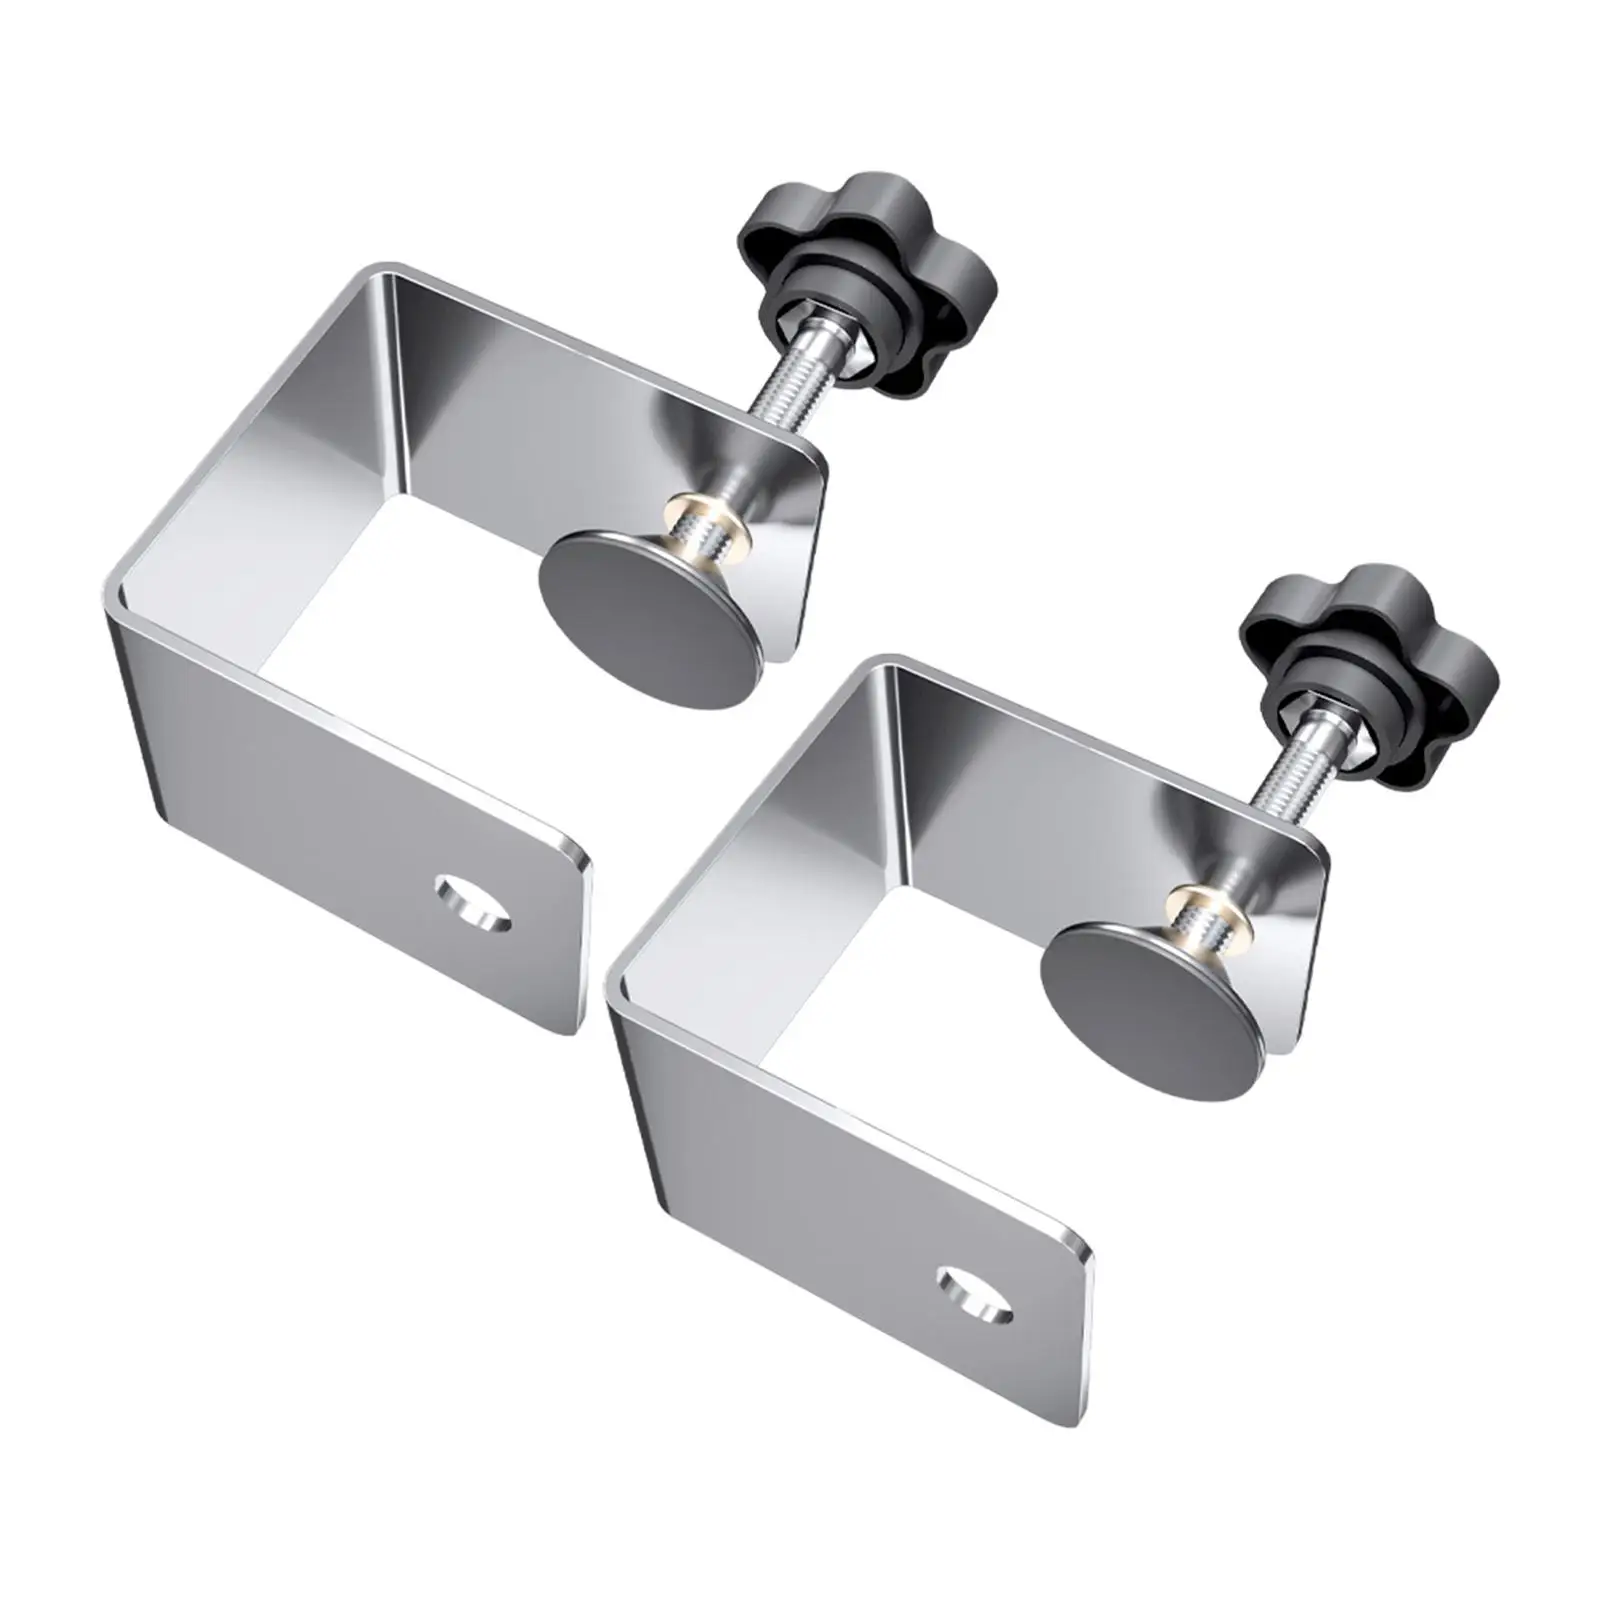 2 Pieces Cabinet Mounting Clip G Clamp Jig Clamping Tool Adjustable Stainless